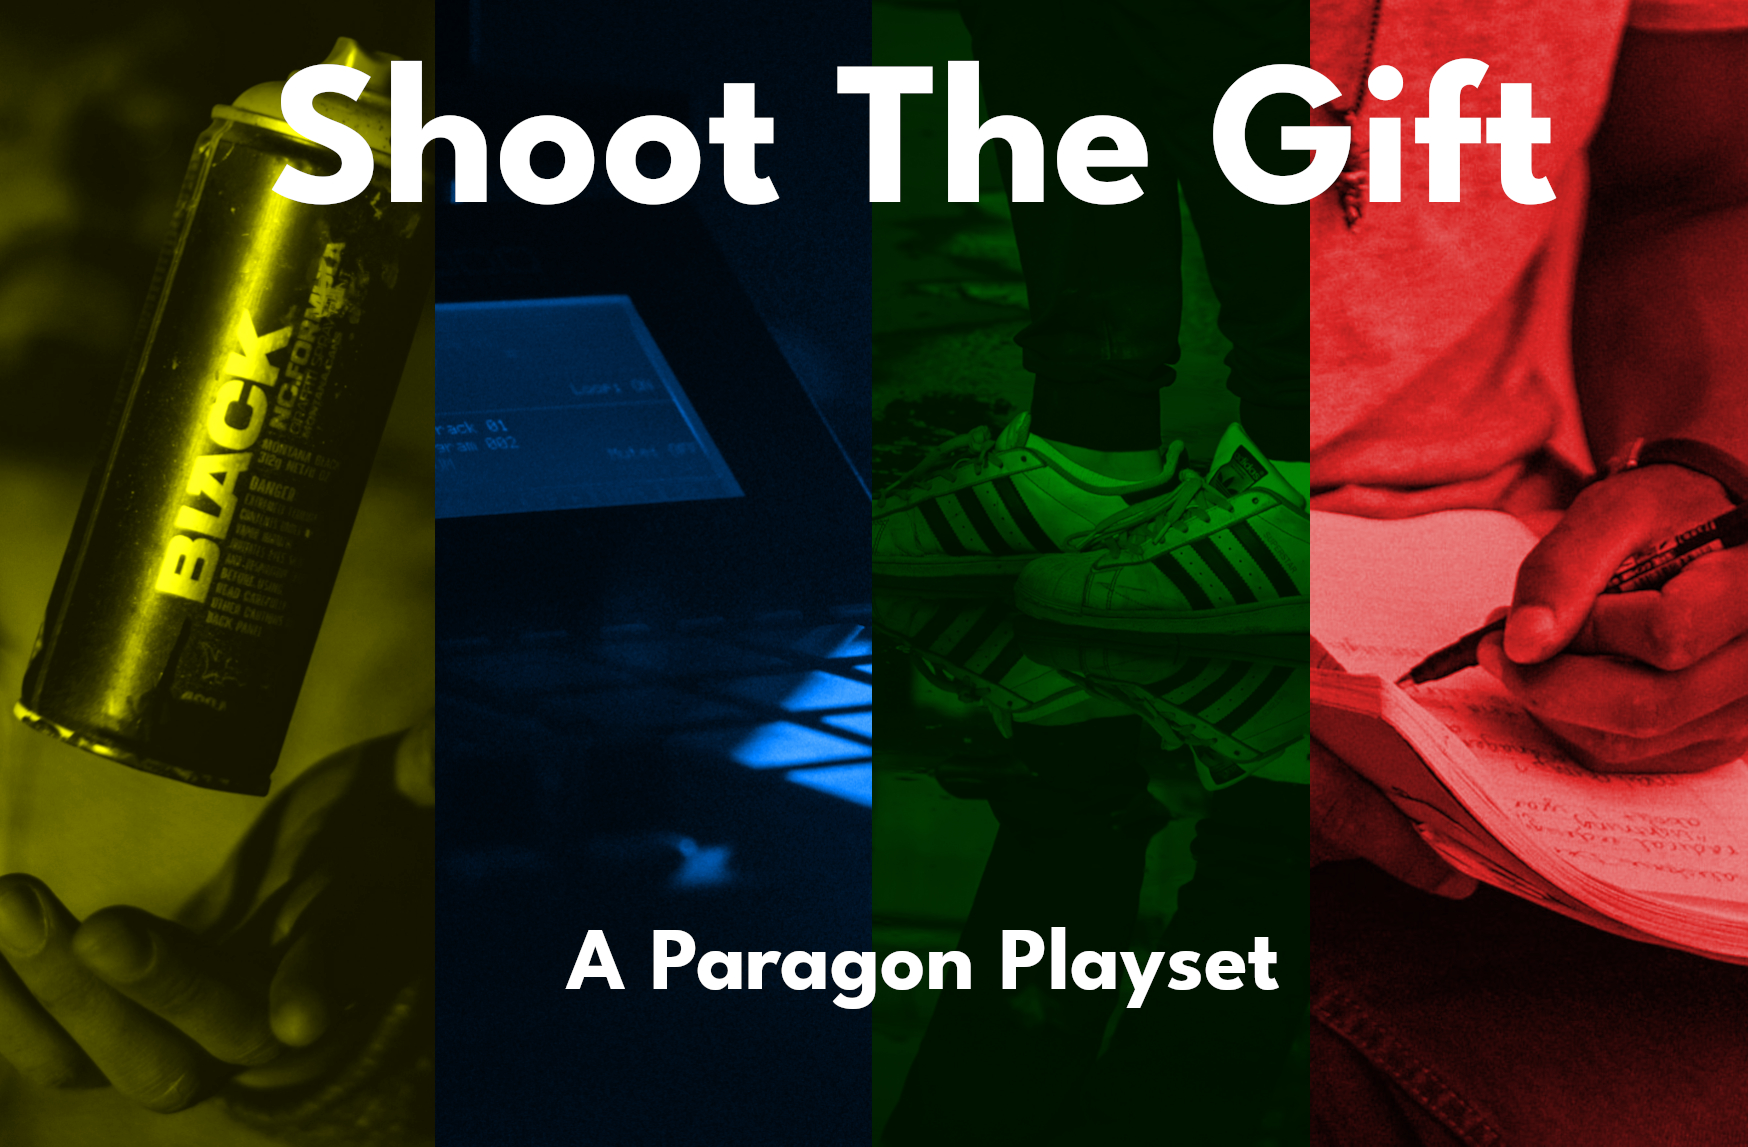 Shoot The Gift: A Paragon Playset